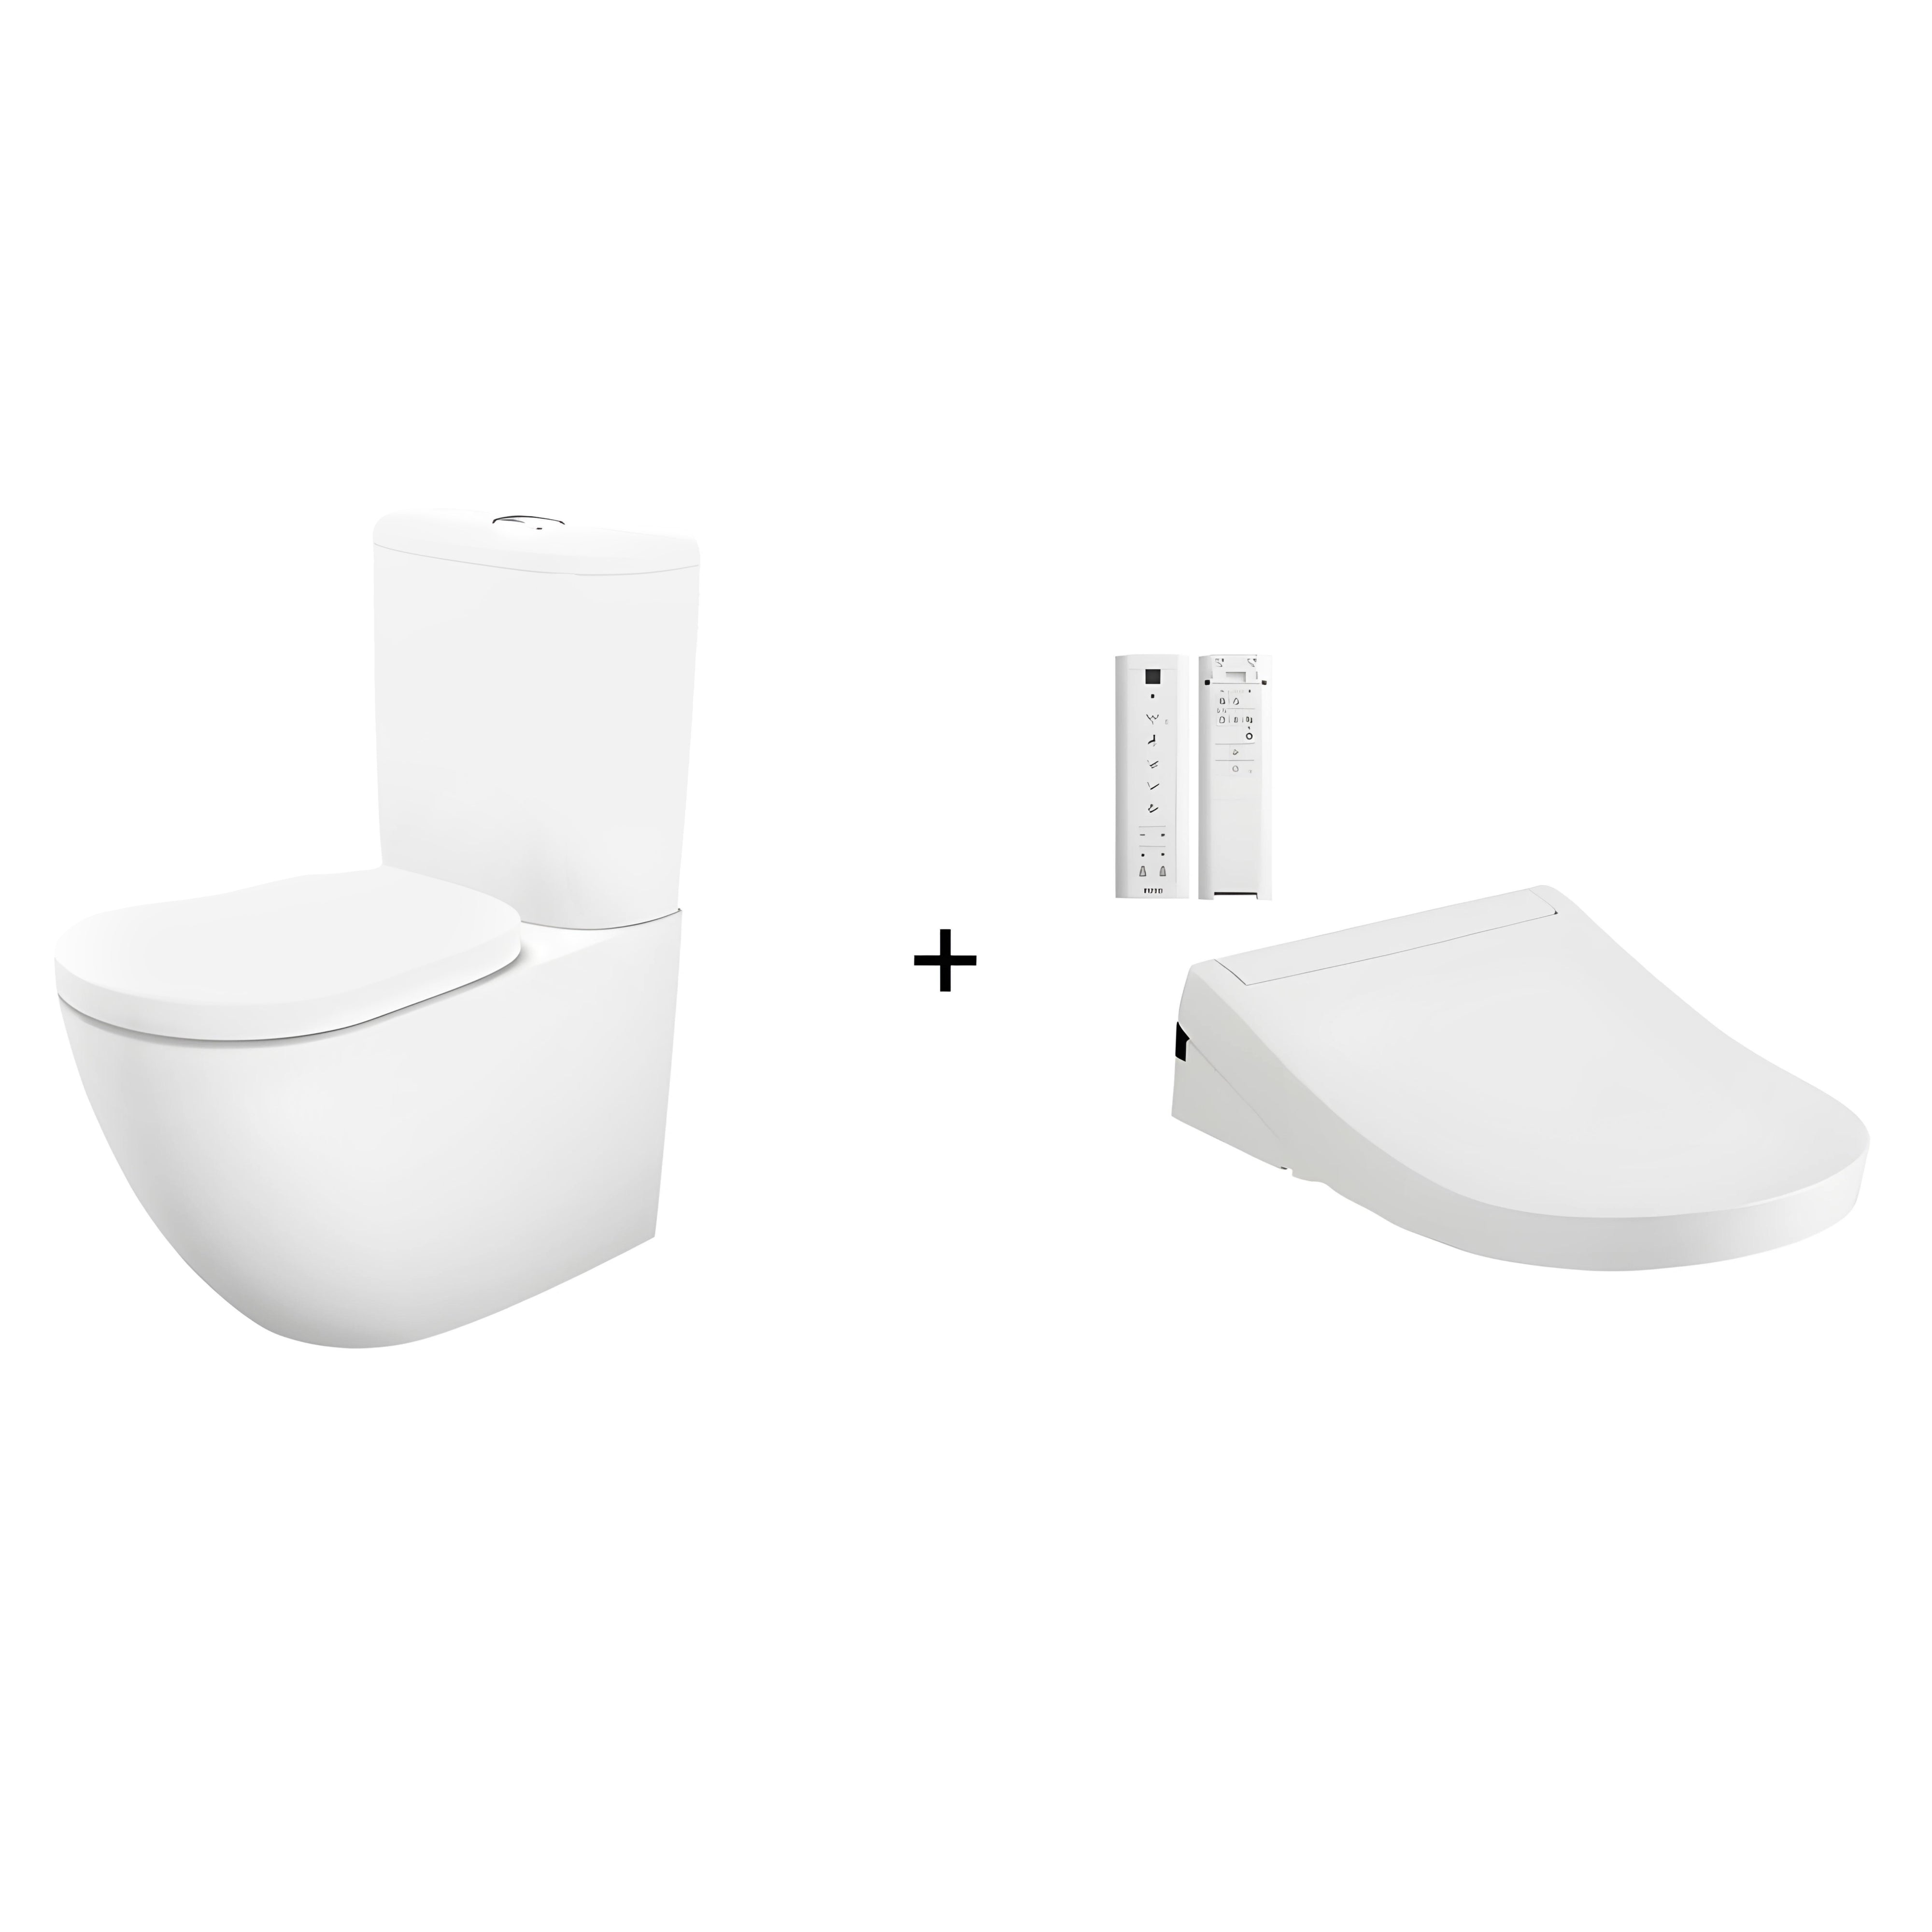 TOTO BASIC+ BTW TOILET AND S5 WASHLET W/ REMOTE CONTROL PACKAGE D-SHAPED GLOSS WHITE